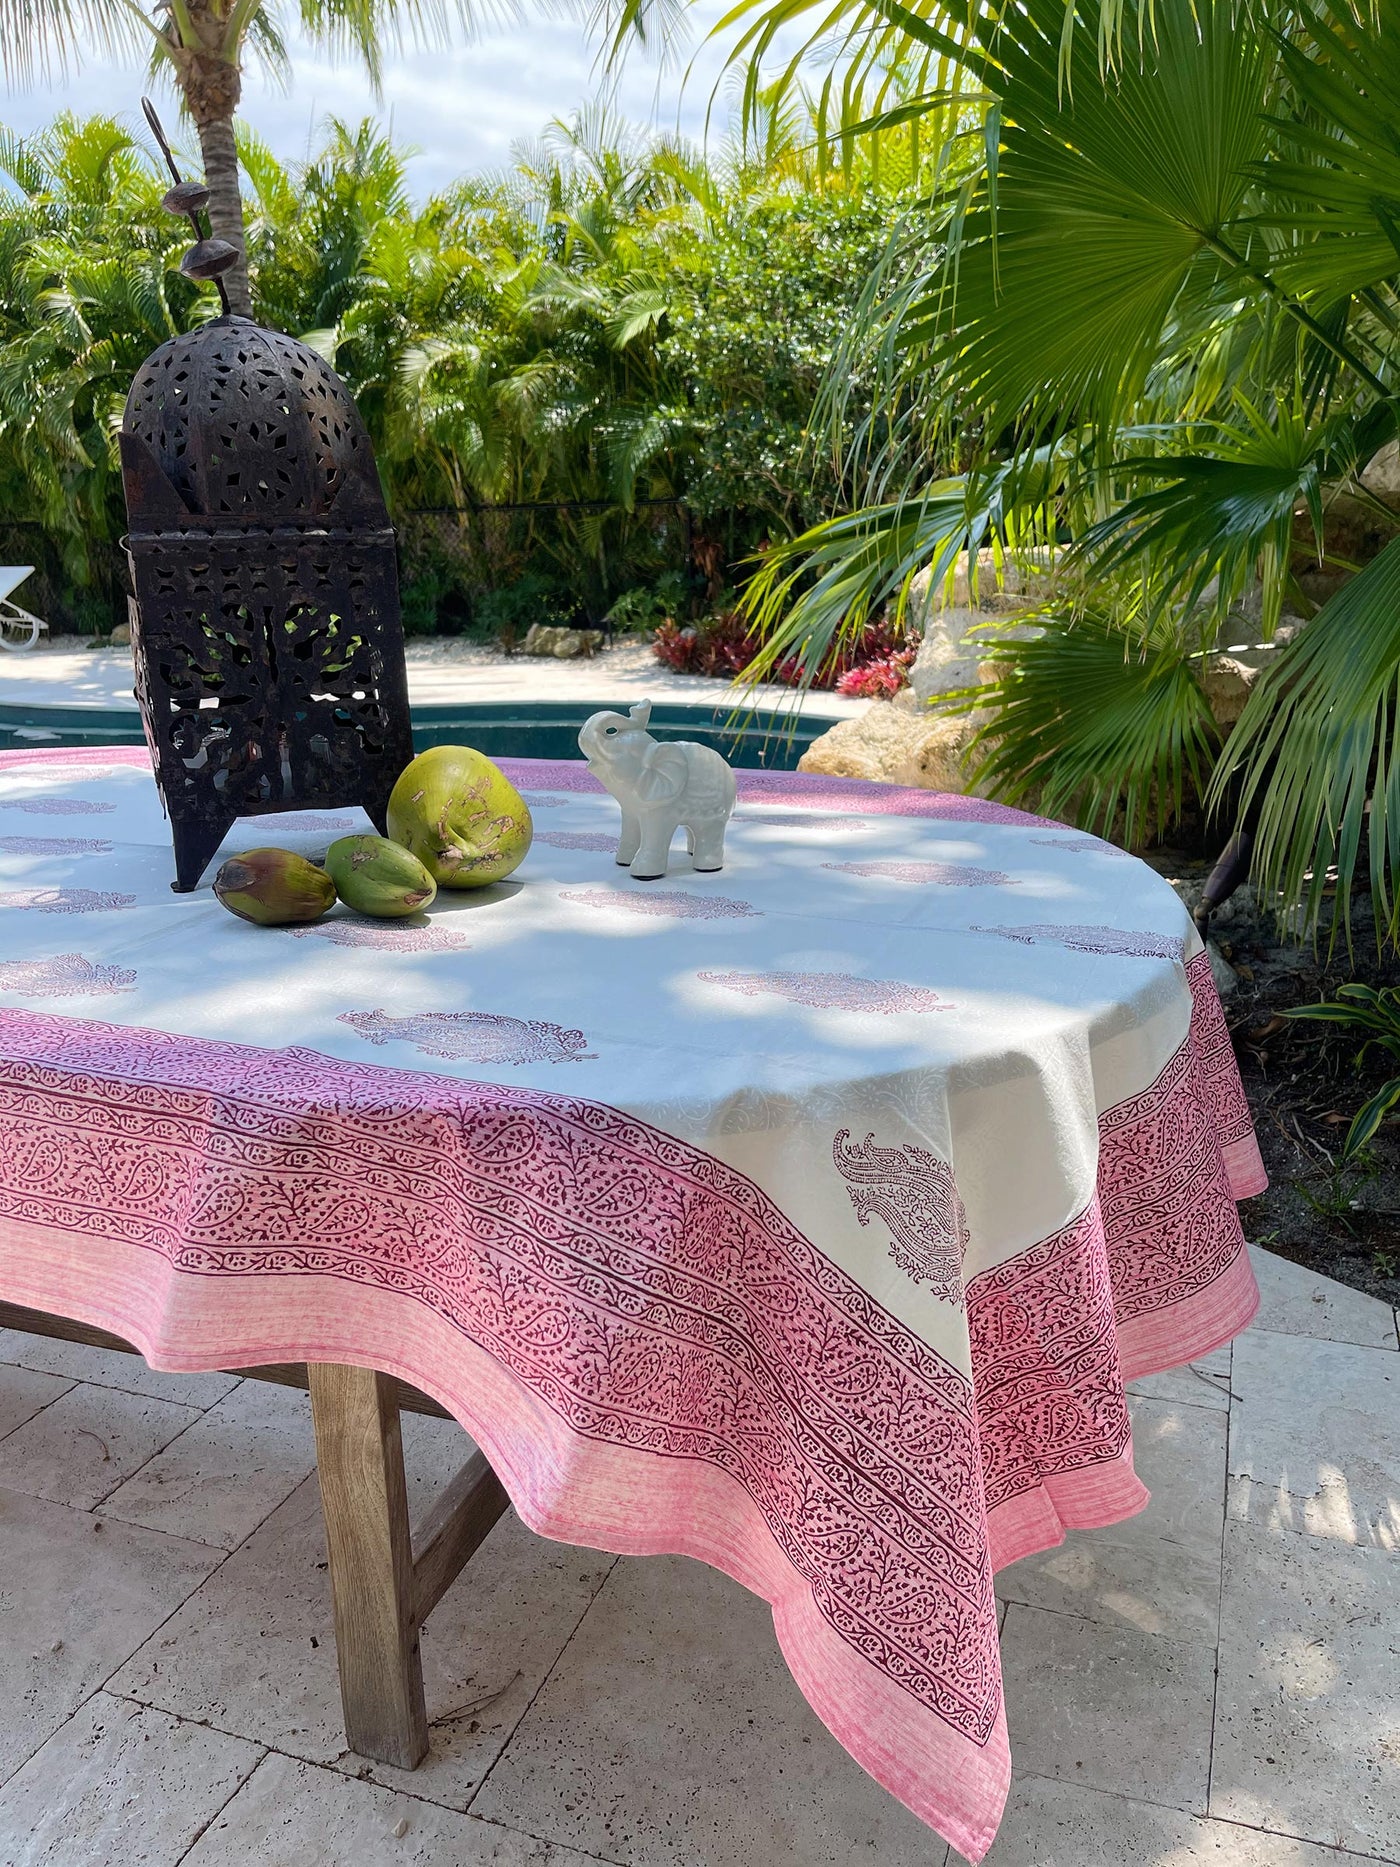 The St. Remy Tablecloth